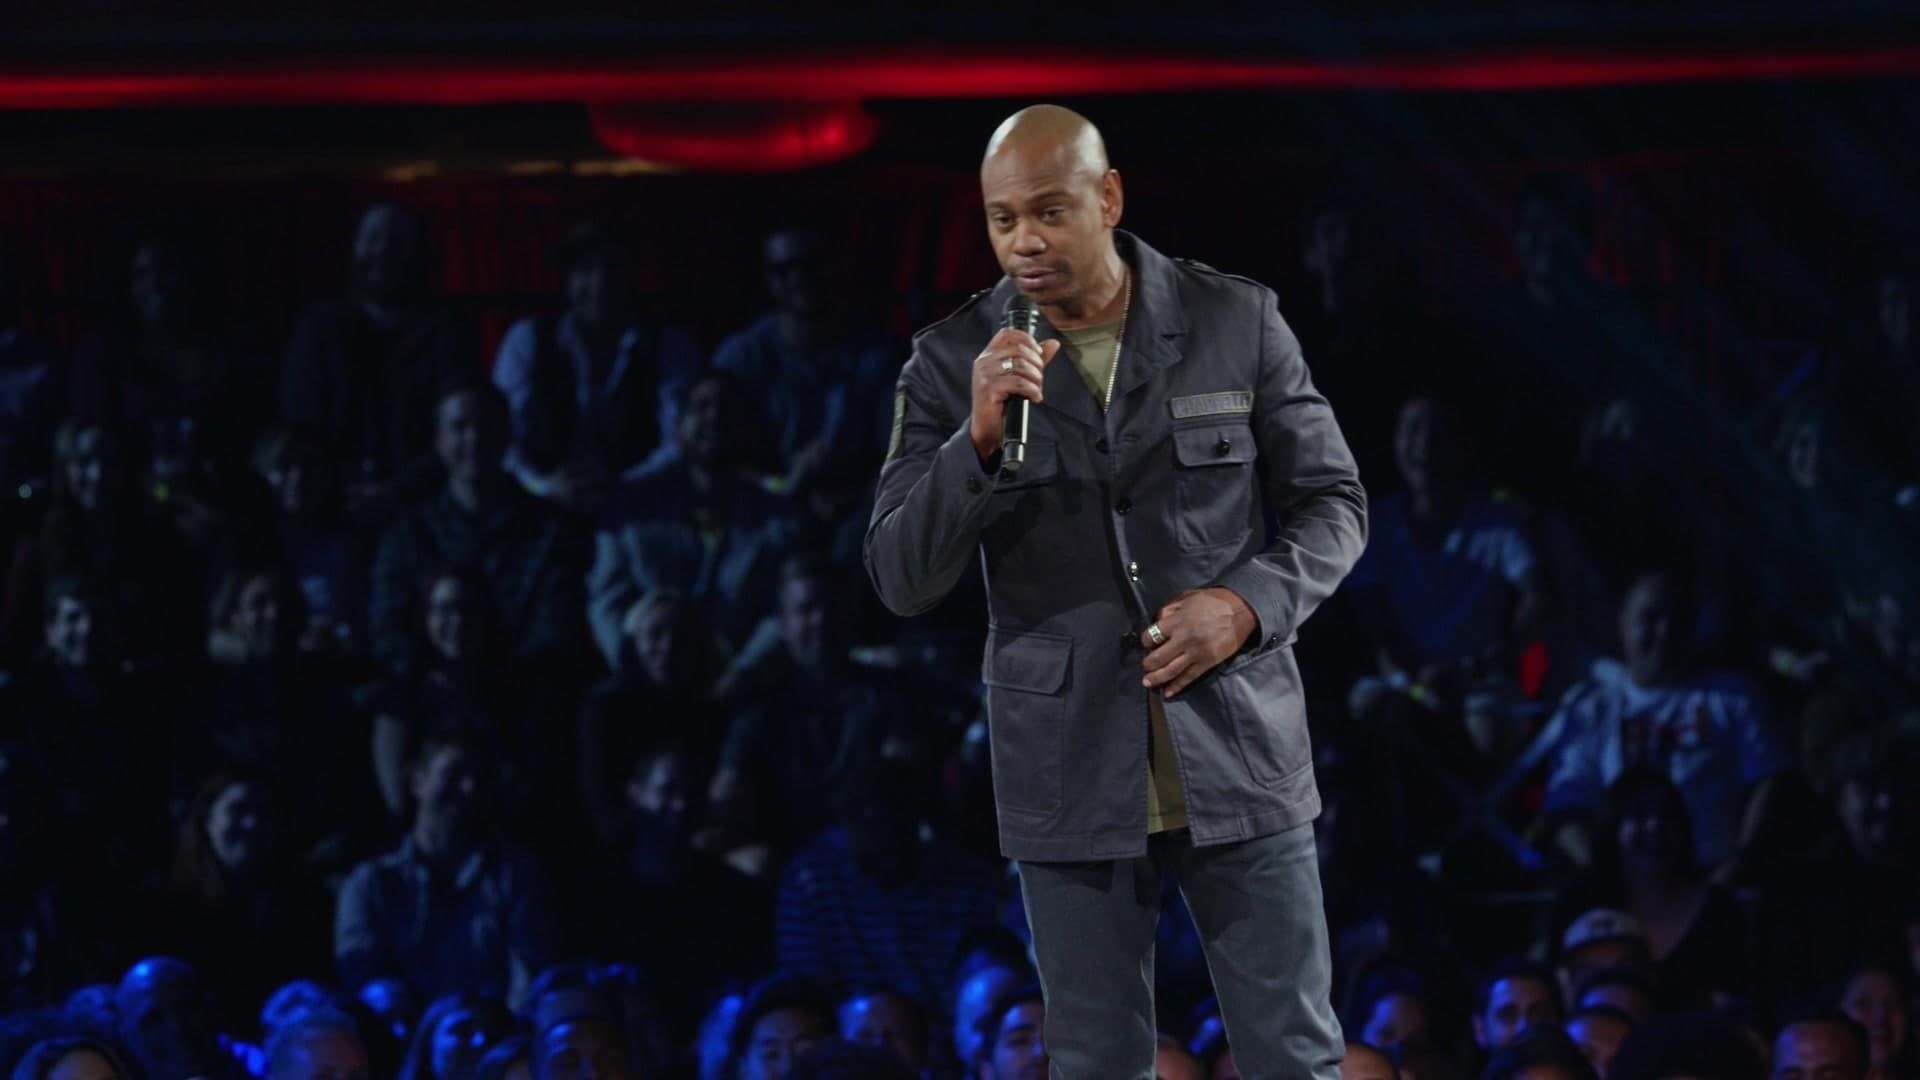 Cubierta de The Age of Spin: Dave Chappelle Live at the Hollywood Palladium